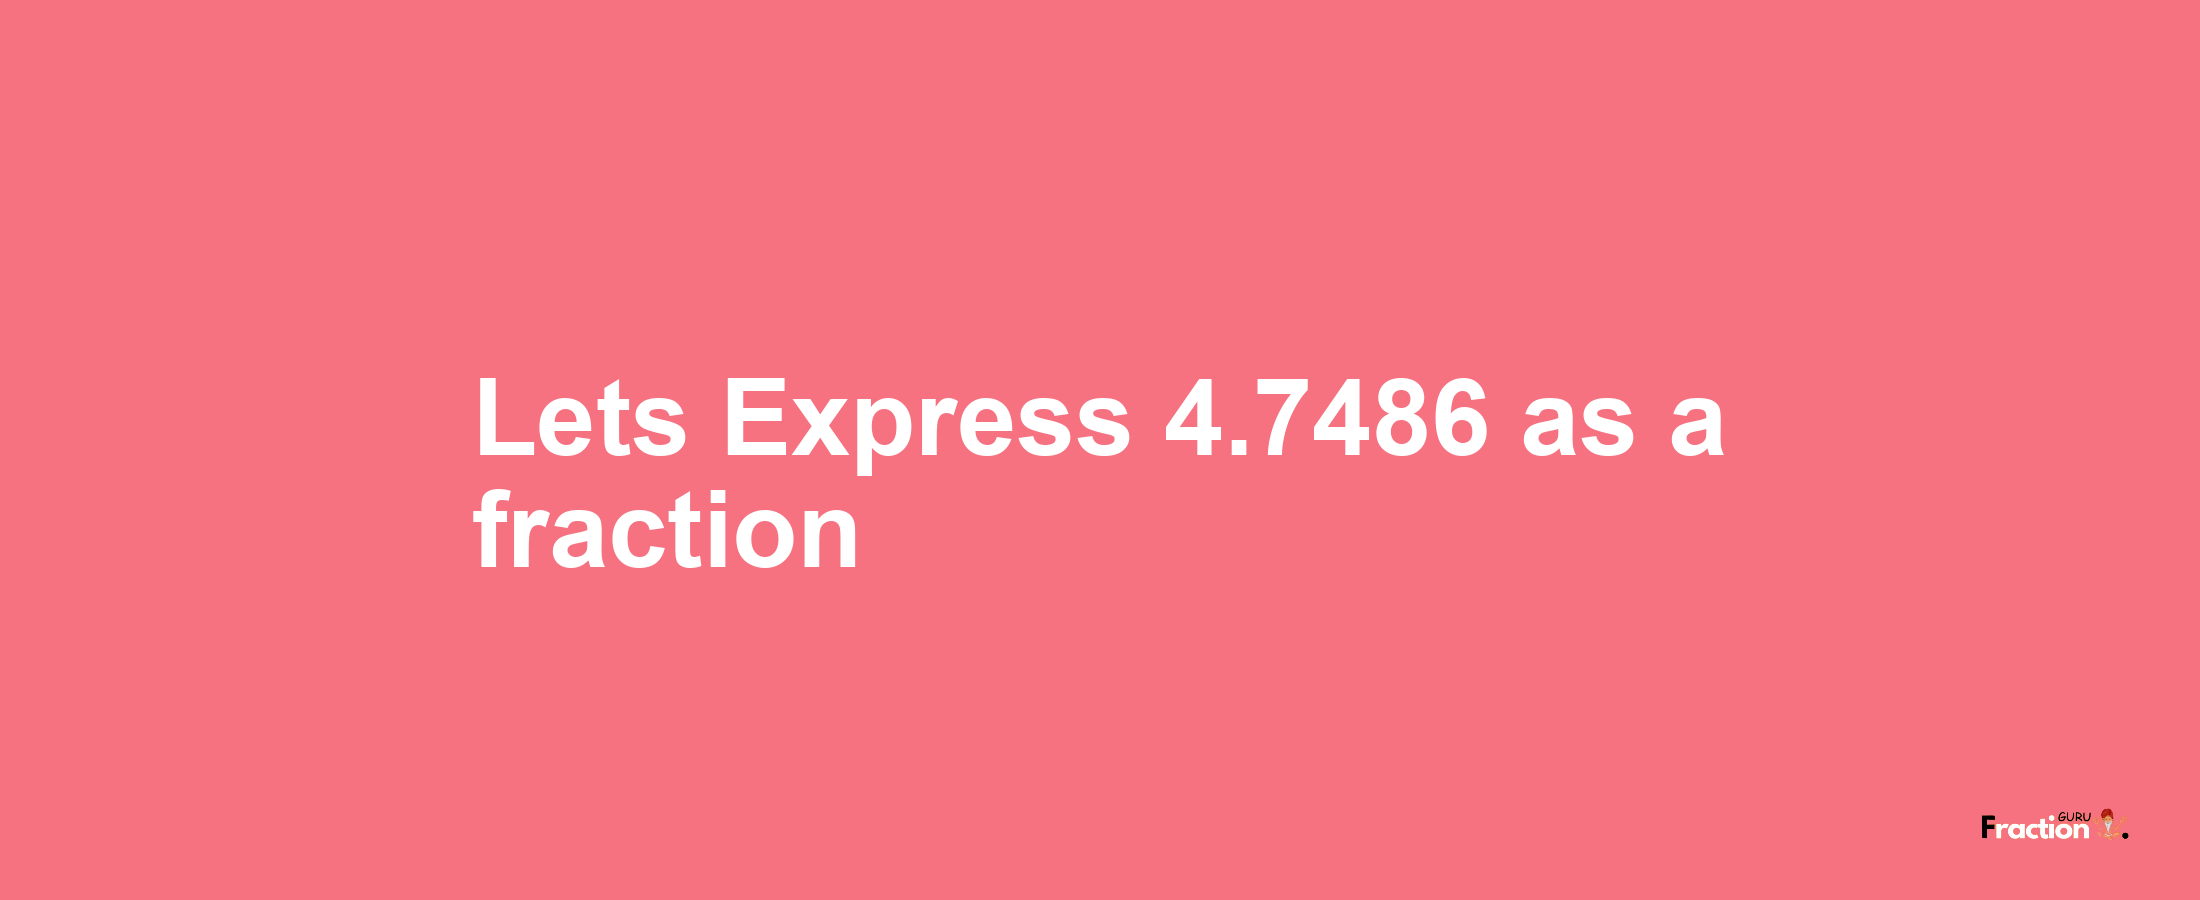 Lets Express 4.7486 as afraction